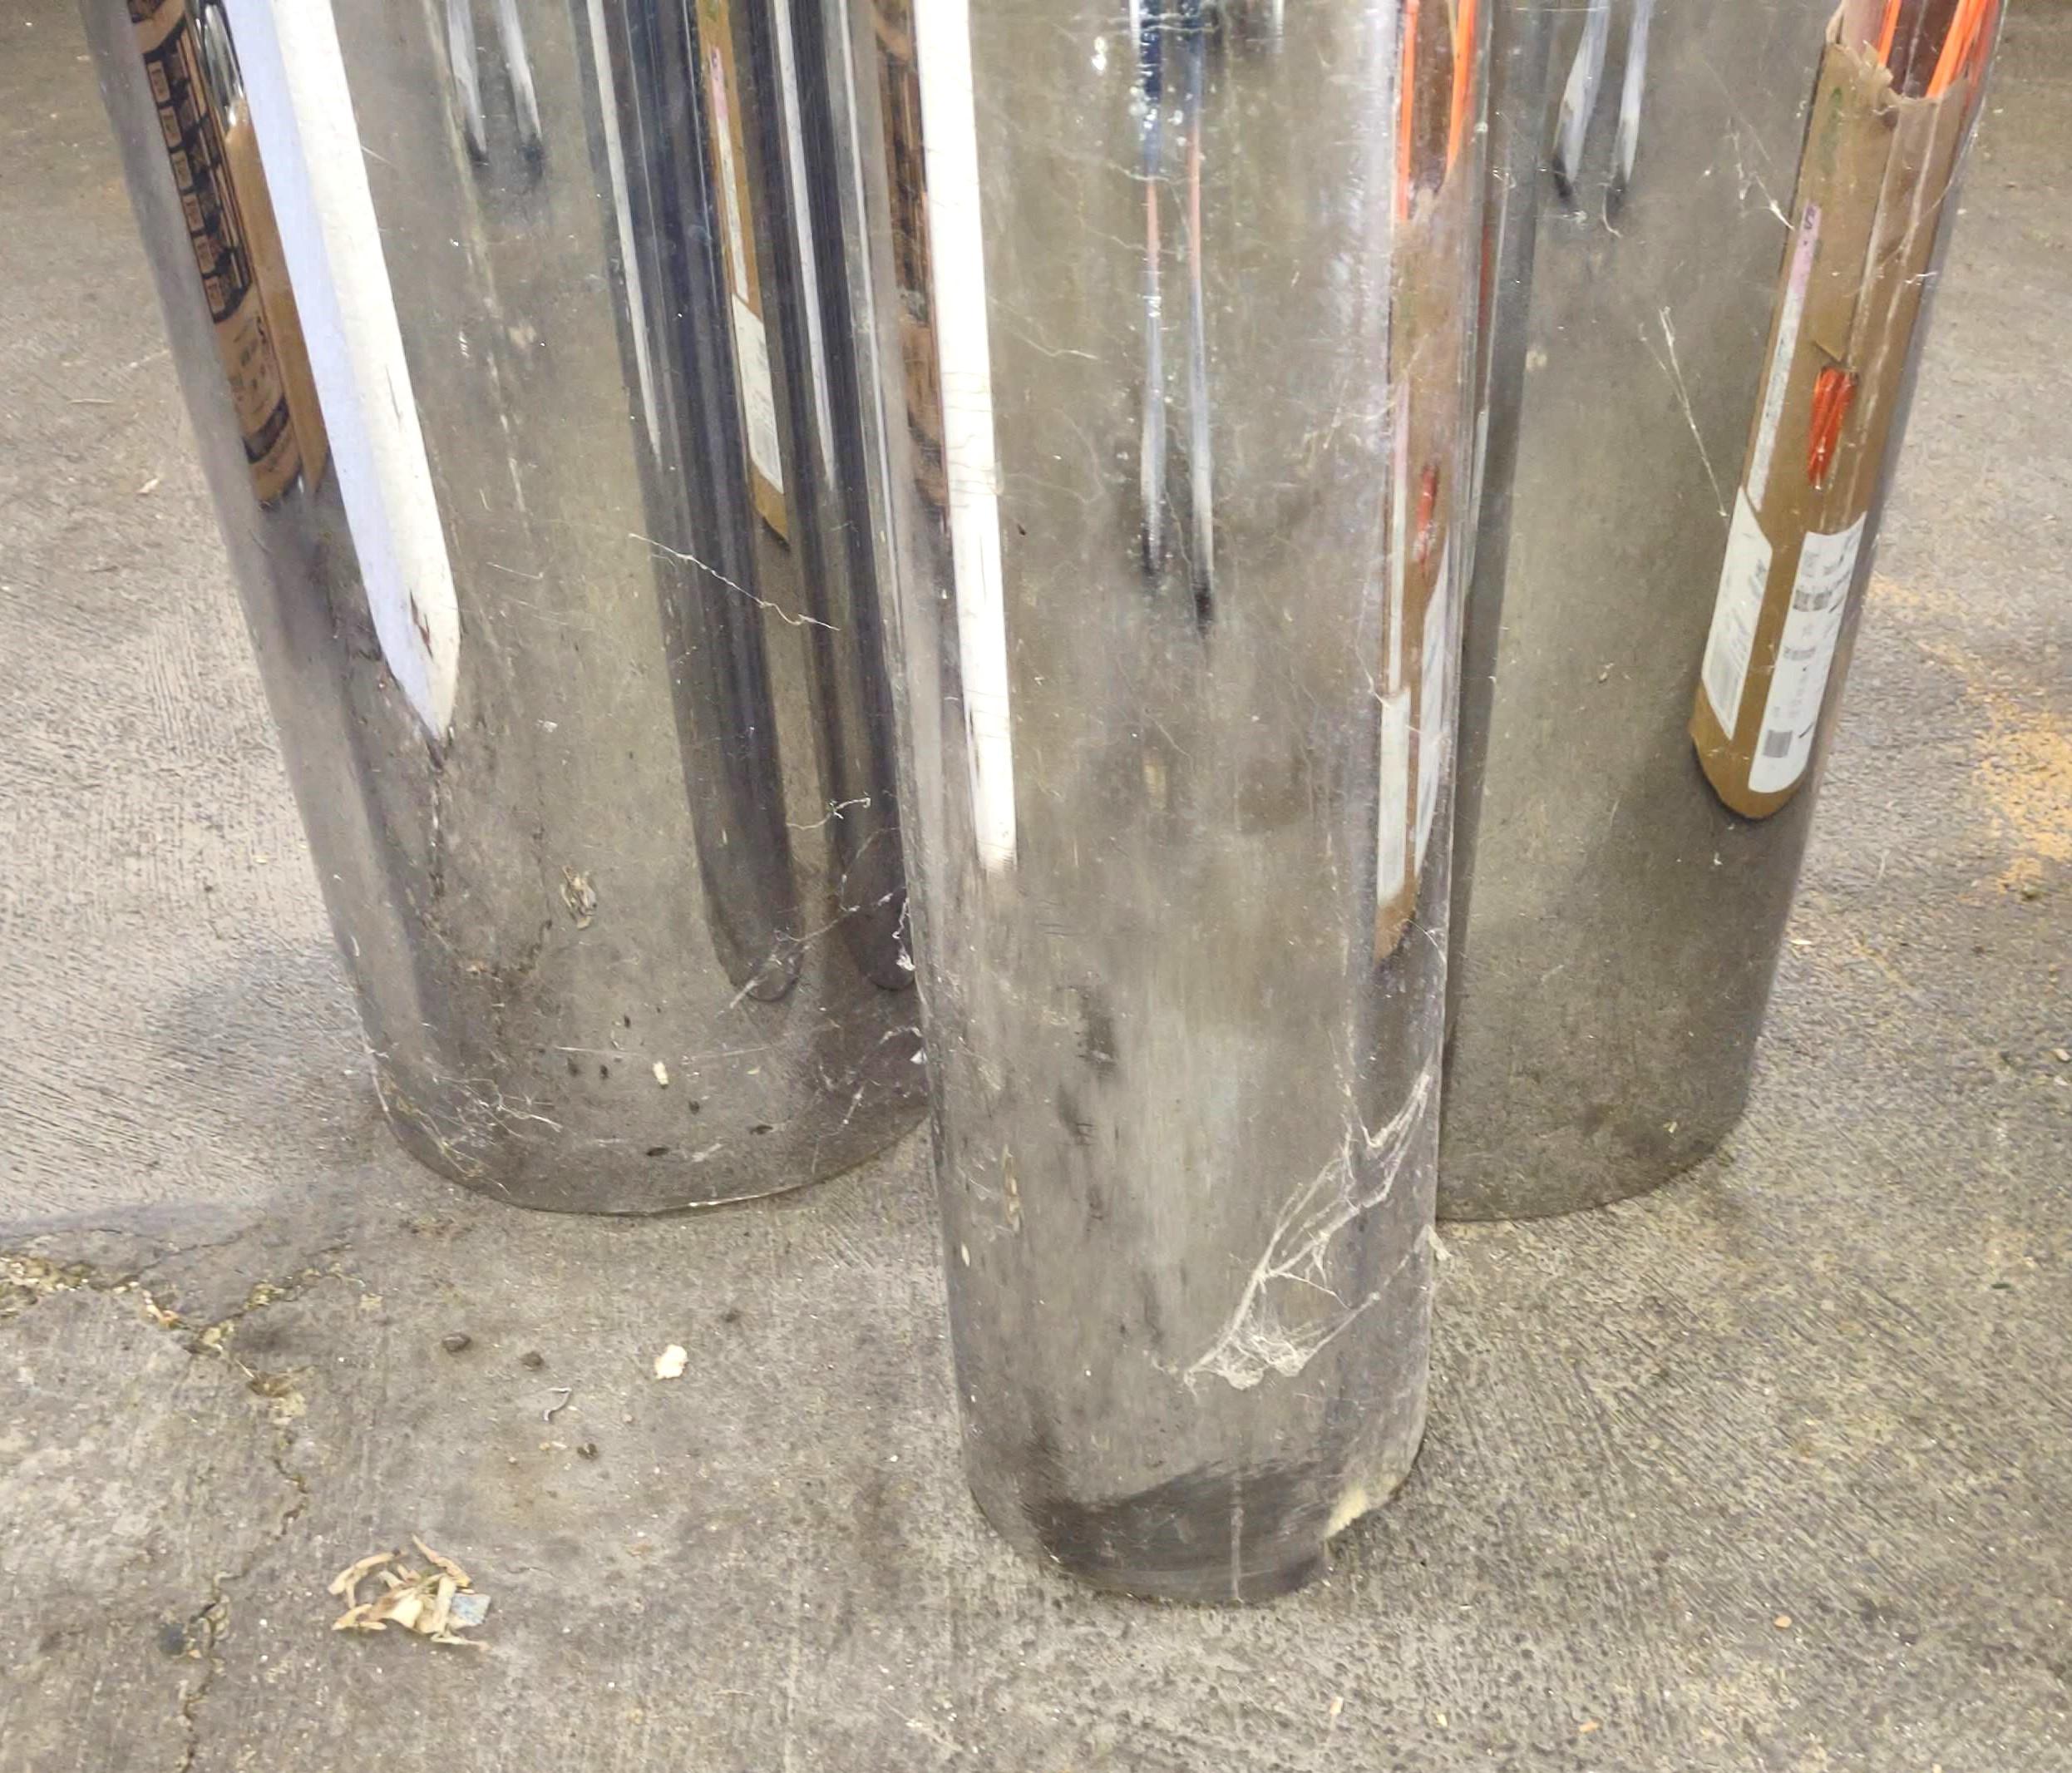 LARGE CHROME EXHAUST PIPES "AS IS" - PICK UP ONLY